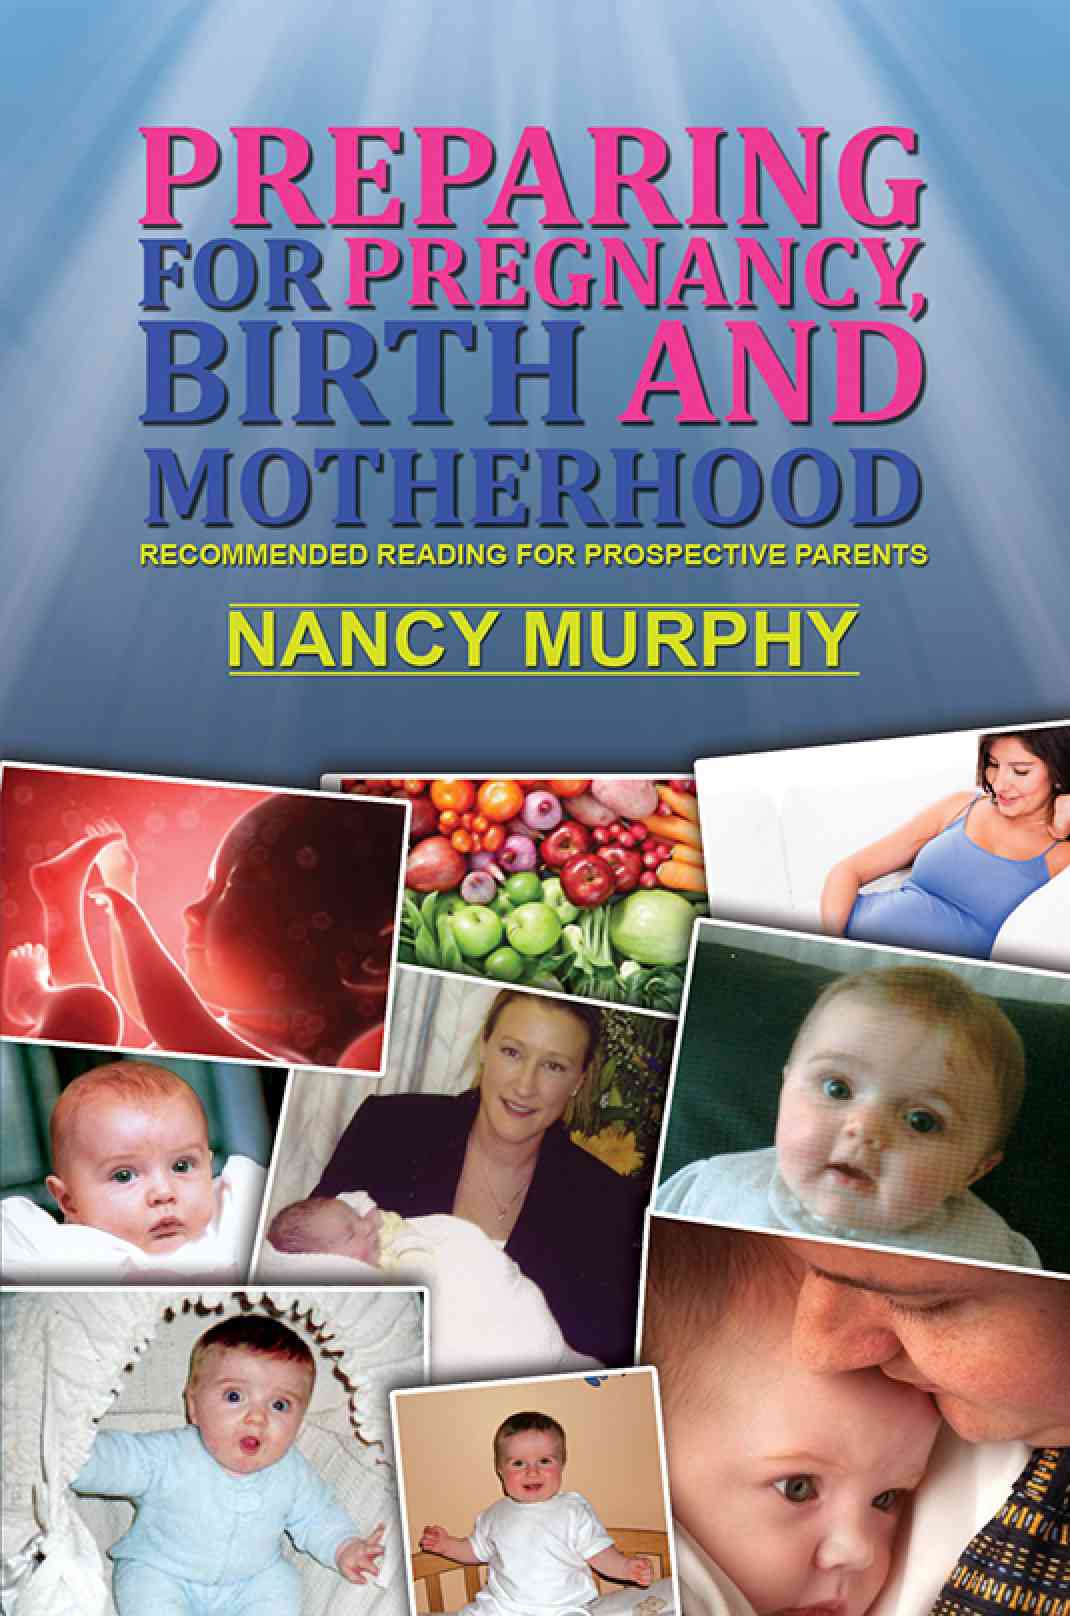 WIN a Copy of Nancy Murphy's 'Preparing For Pregnancy, Birth and Motherhood'